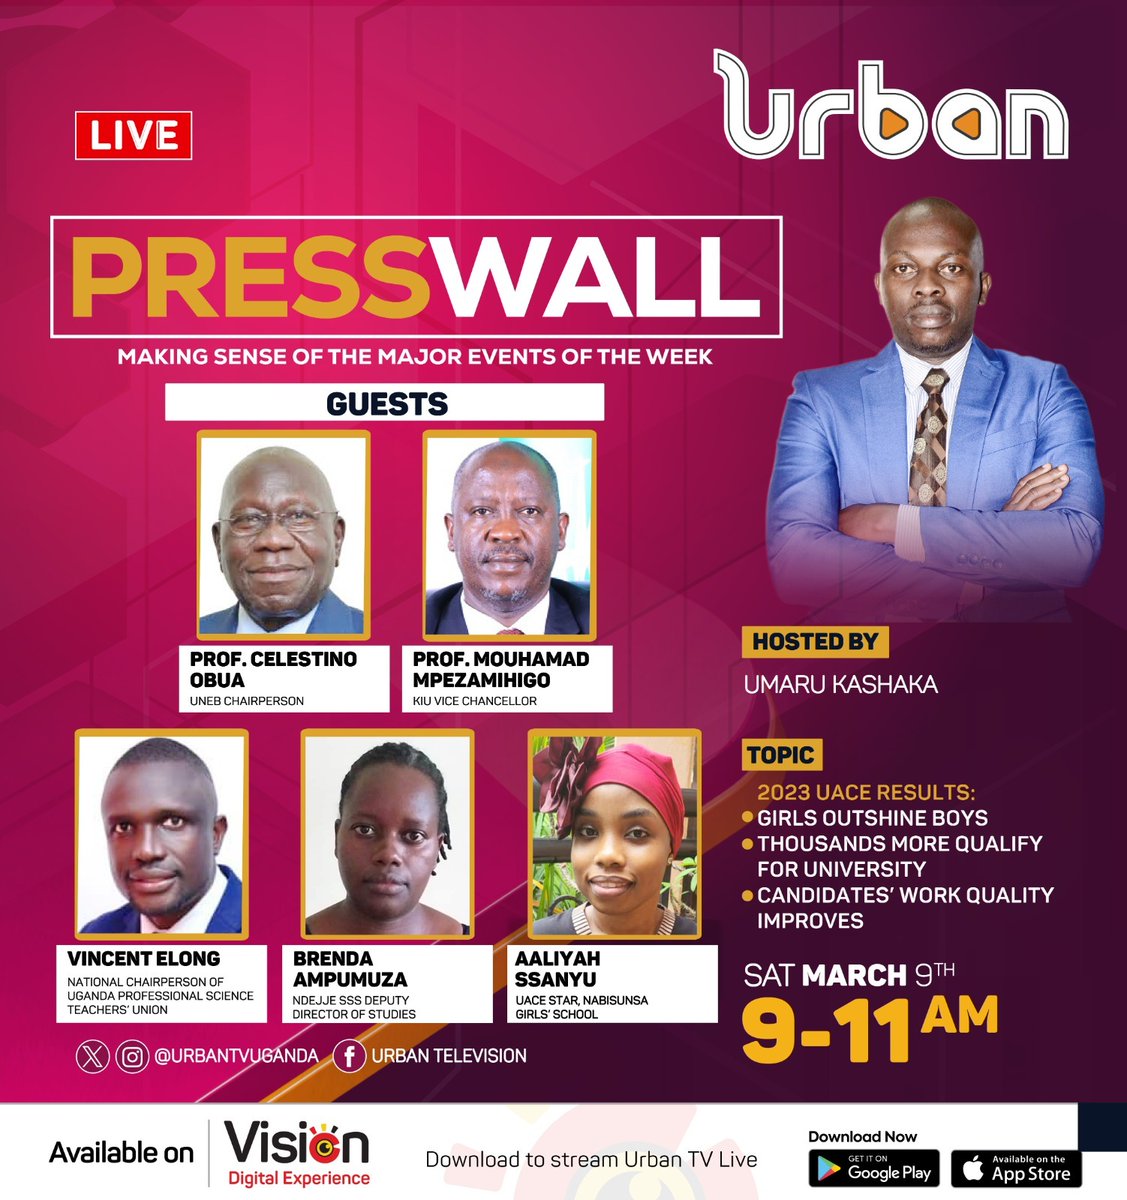 Don't miss #The Press Wall tomorrow on Urban TV at 9:00 am, where we'll be discussing the big headlines of the week. Stay tuned for expert views on the matter @KashakaUmaru #VisionUpdates